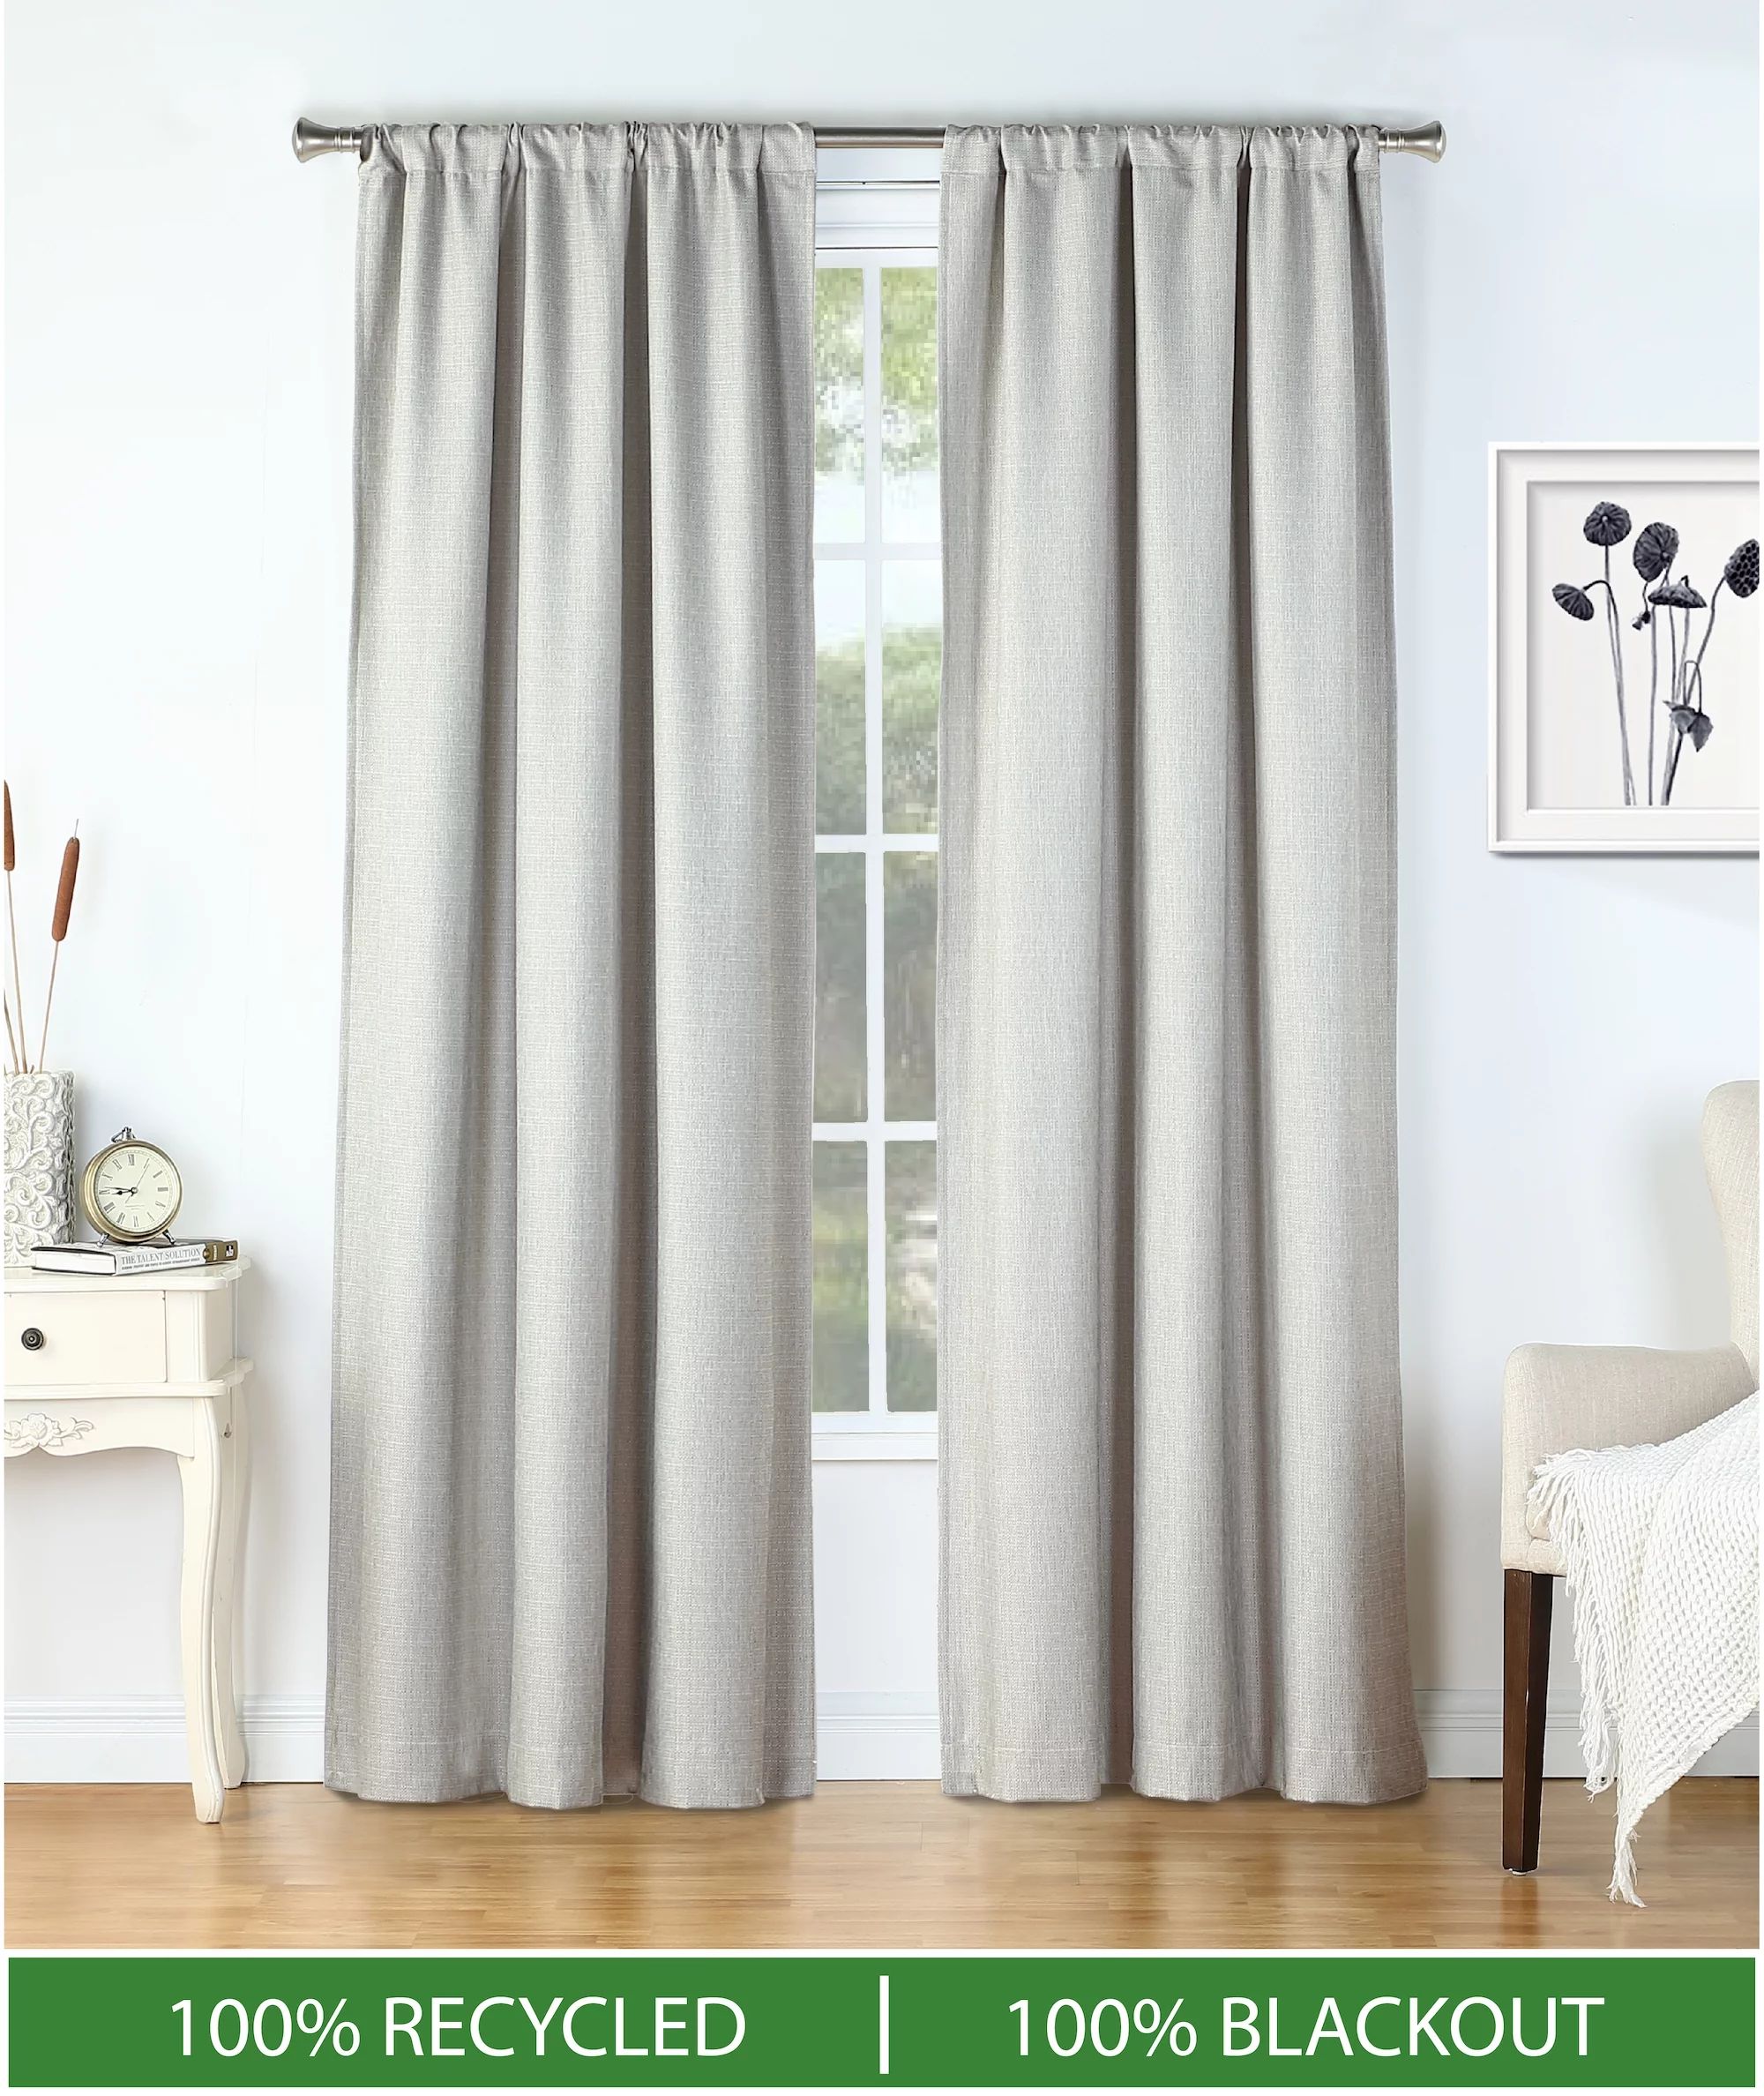 2 Pack - 100% Recycled Total Blackout Curtain Panel Pair - Walmart.com | Walmart (US)